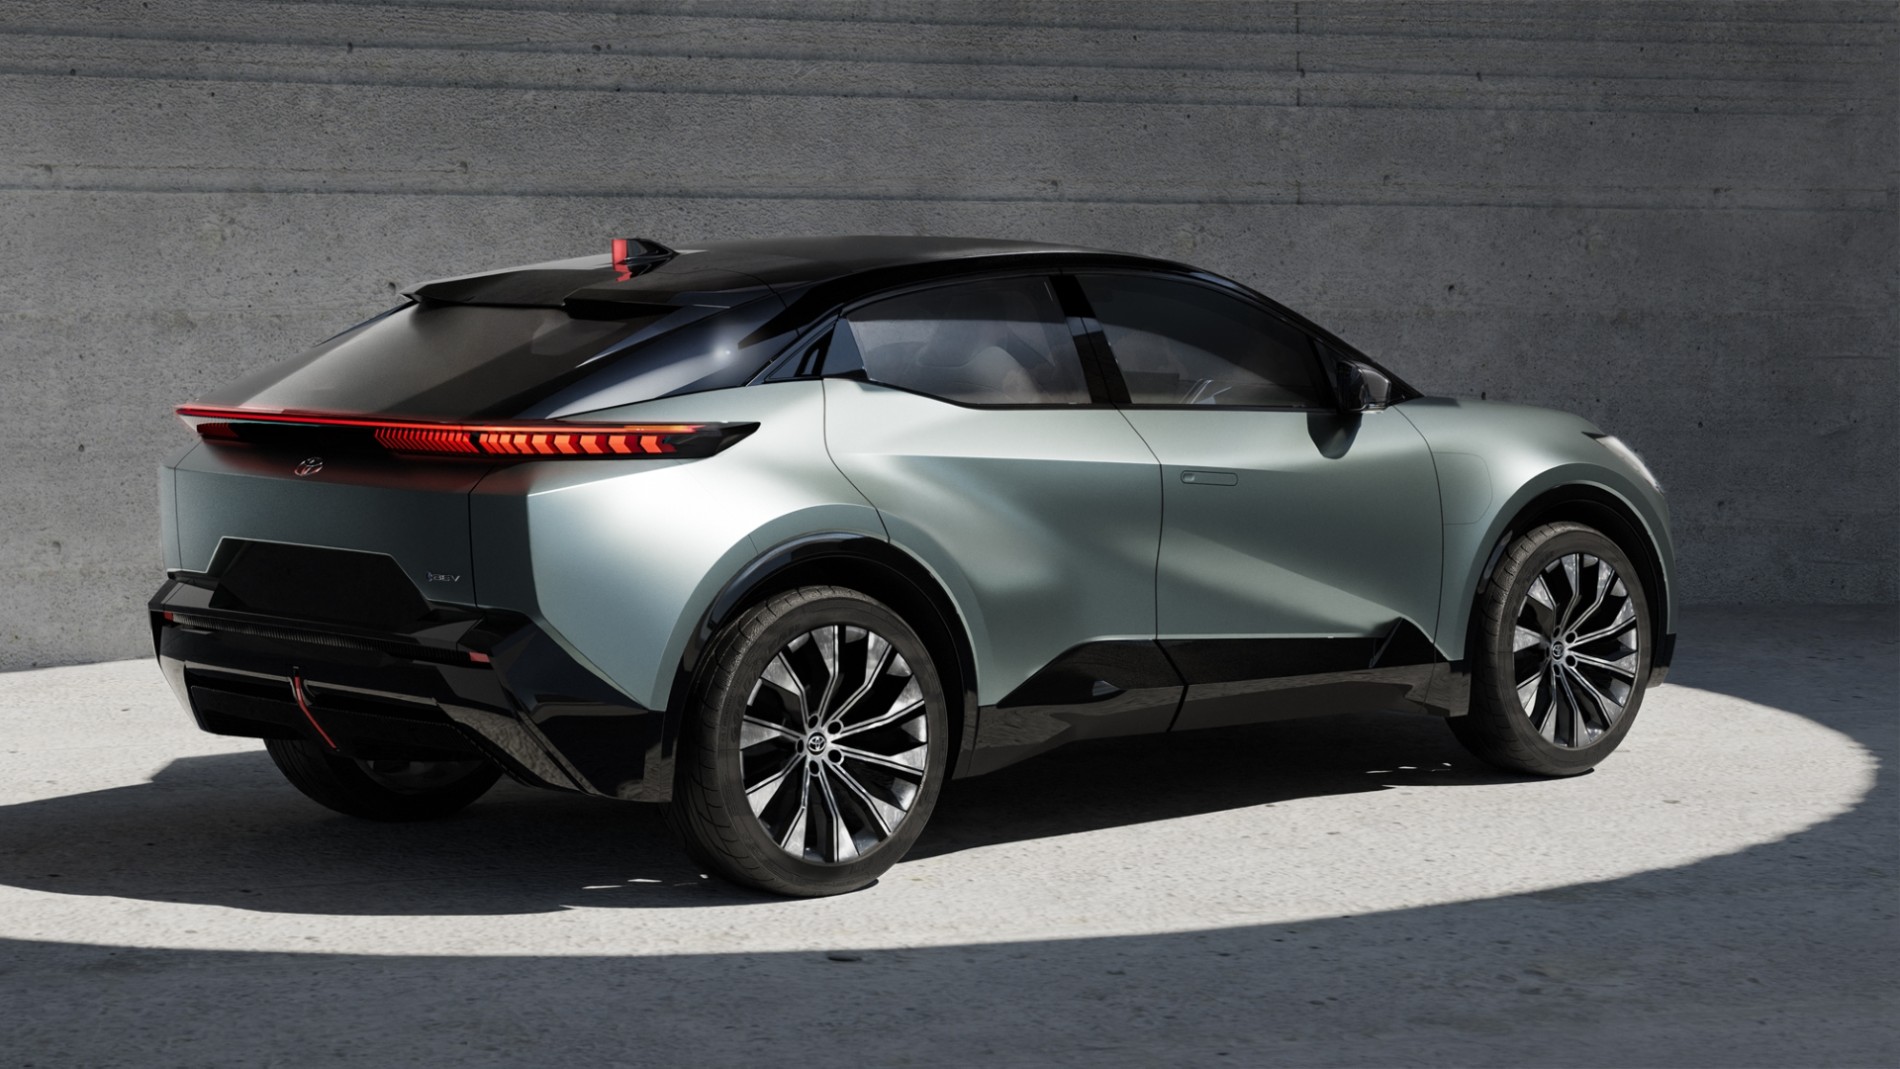 Toyota bZ Compact SUV Concept - Toyota bZ Compact SUV Concept